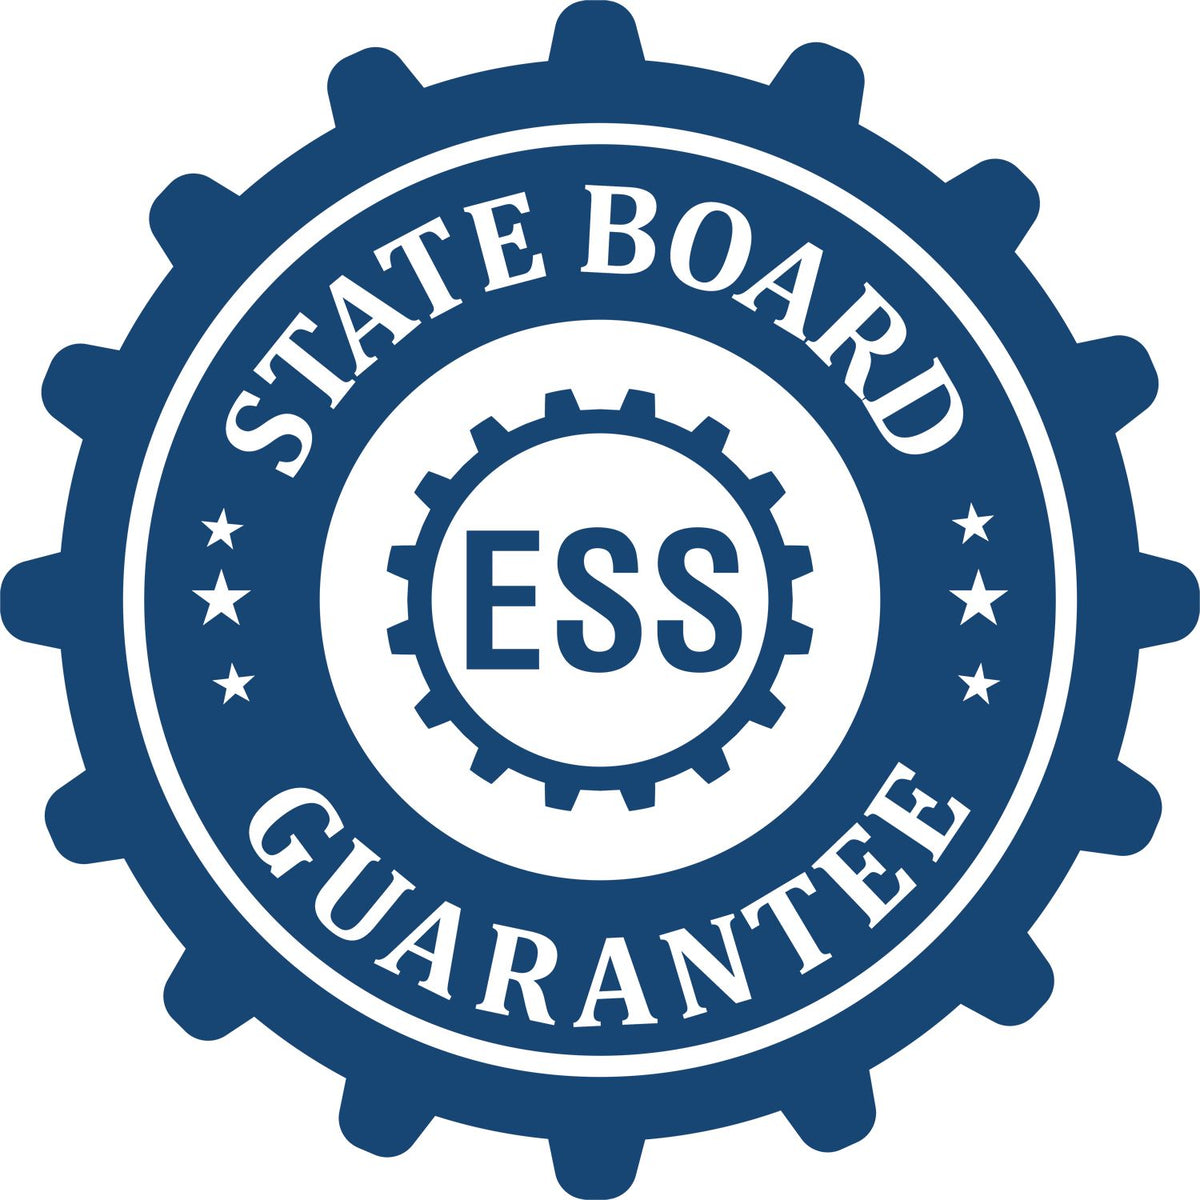 An emblem in a gear shape illustrating a state board guarantee for the Heavy-Duty South Dakota Rectangular Notary Stamp product.